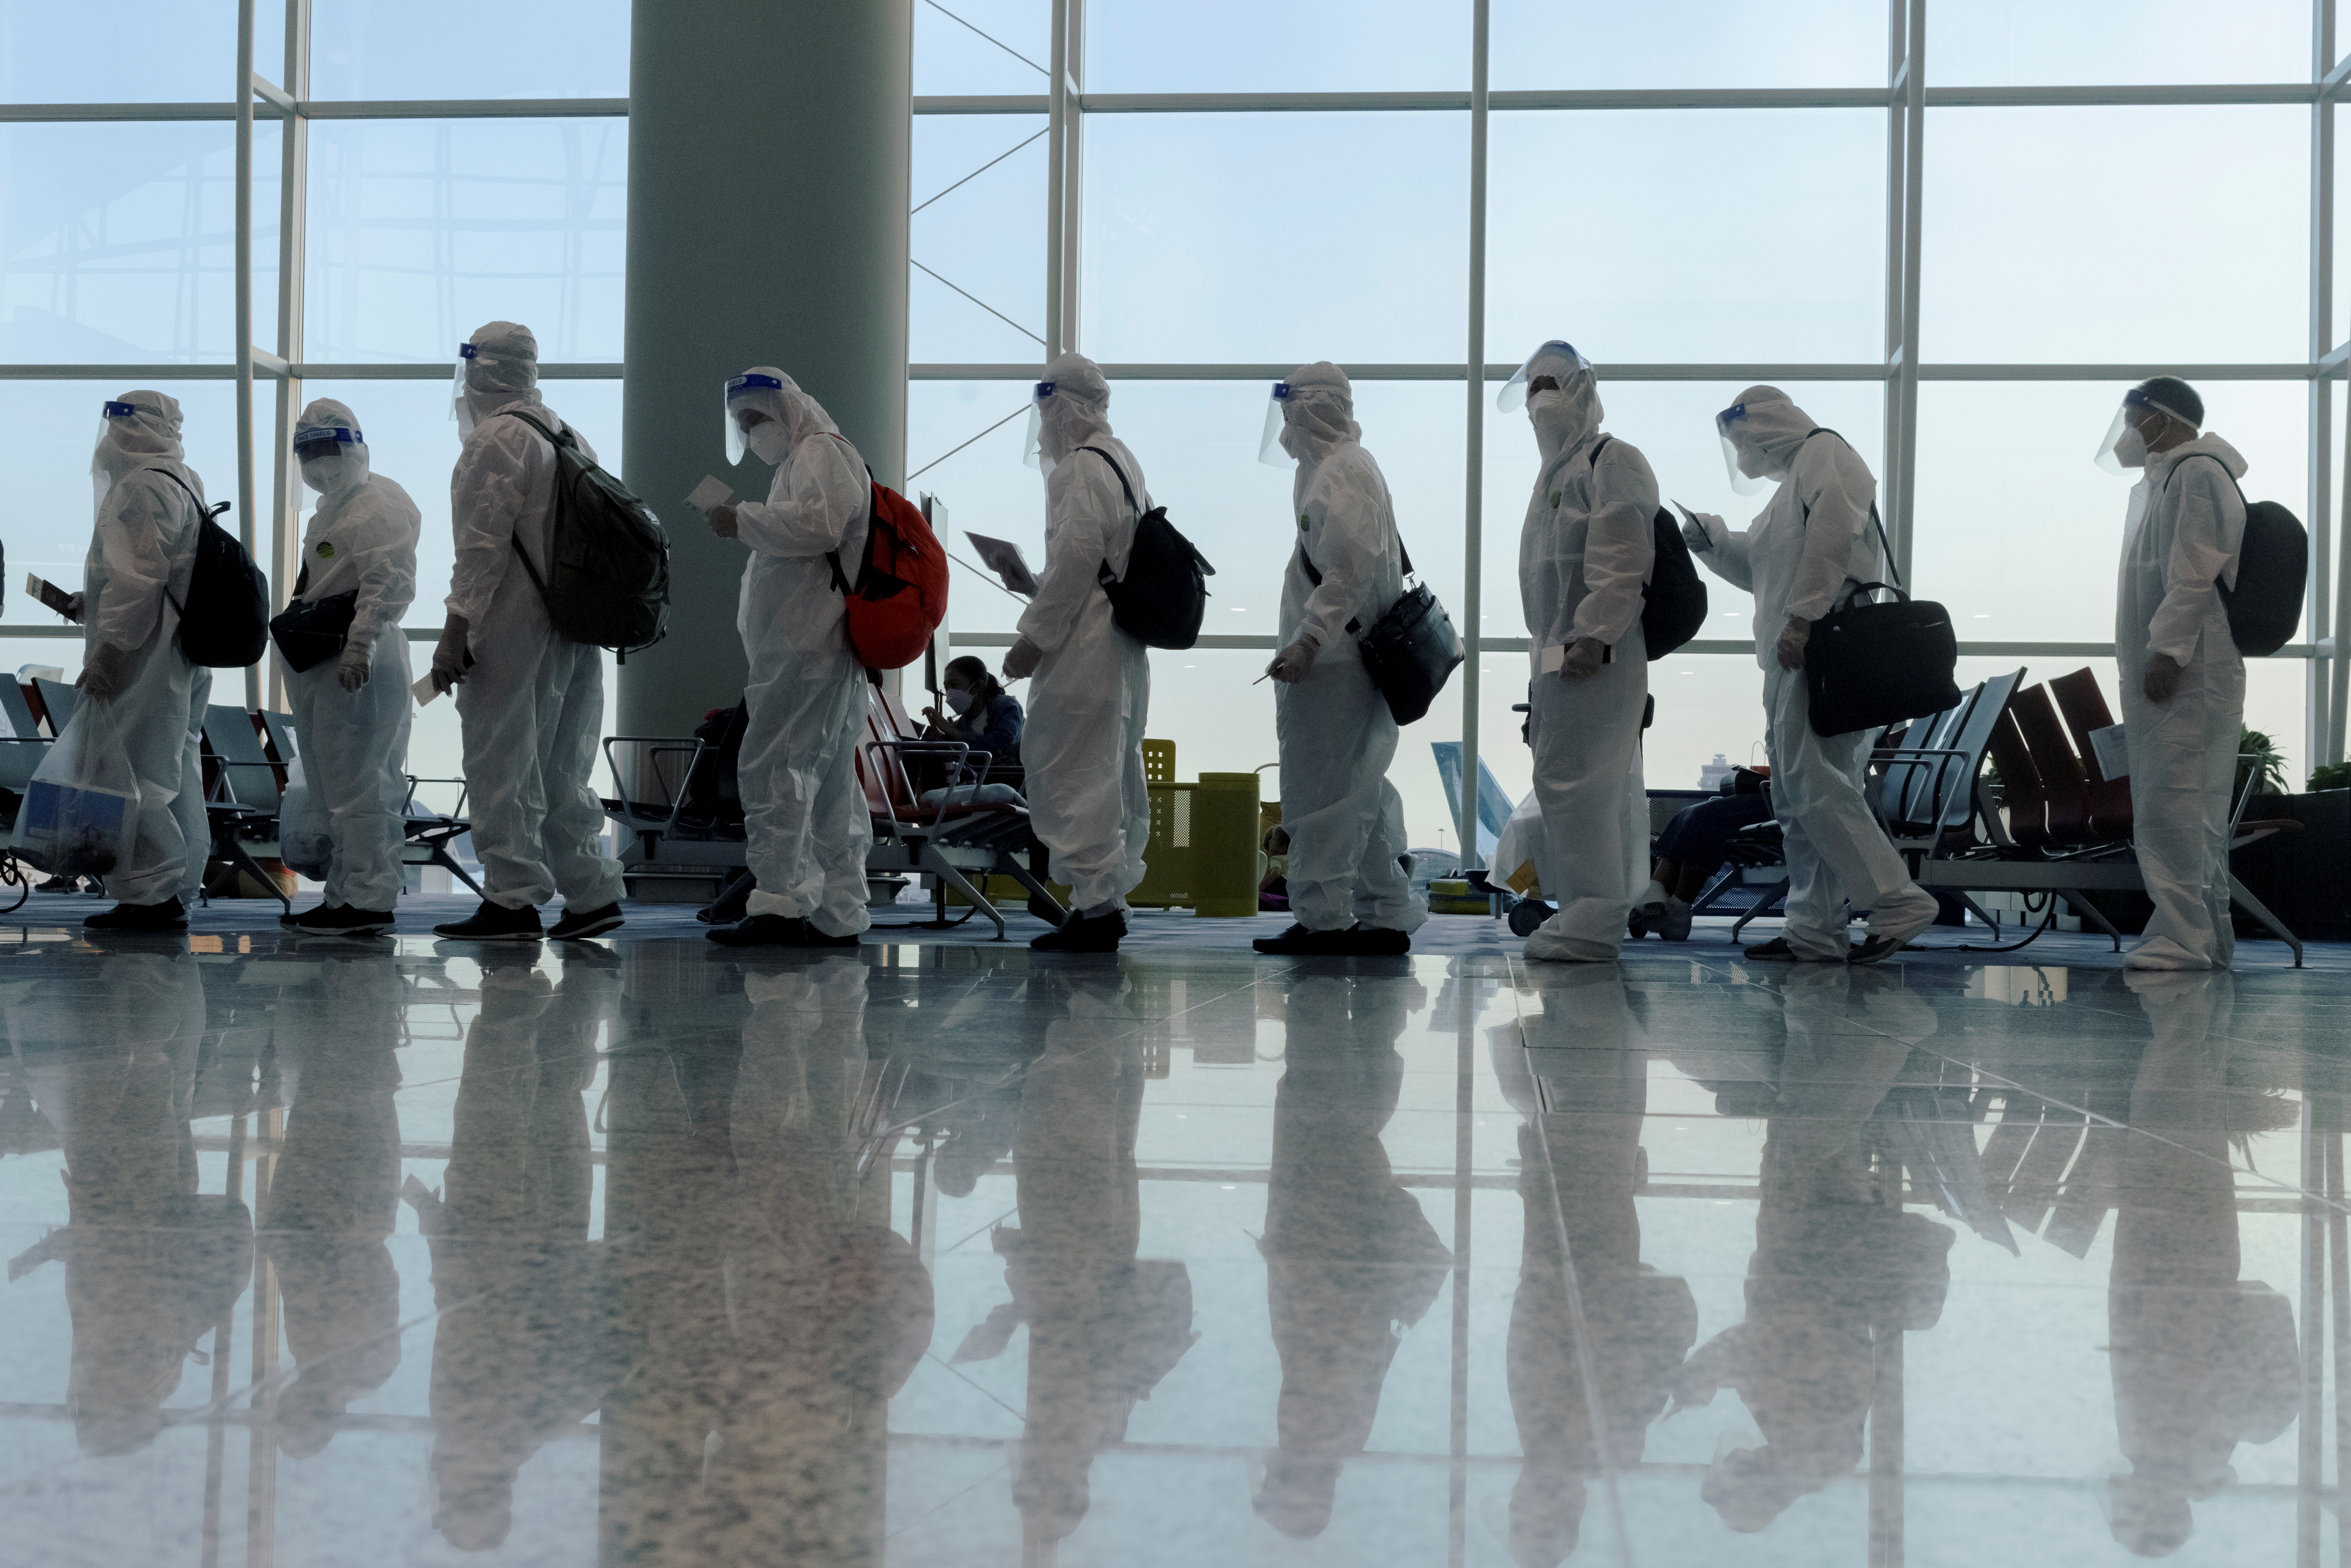 Passengers wearing protective suits (PPE) line up to board their plane for an international flight at Hong Kong airport